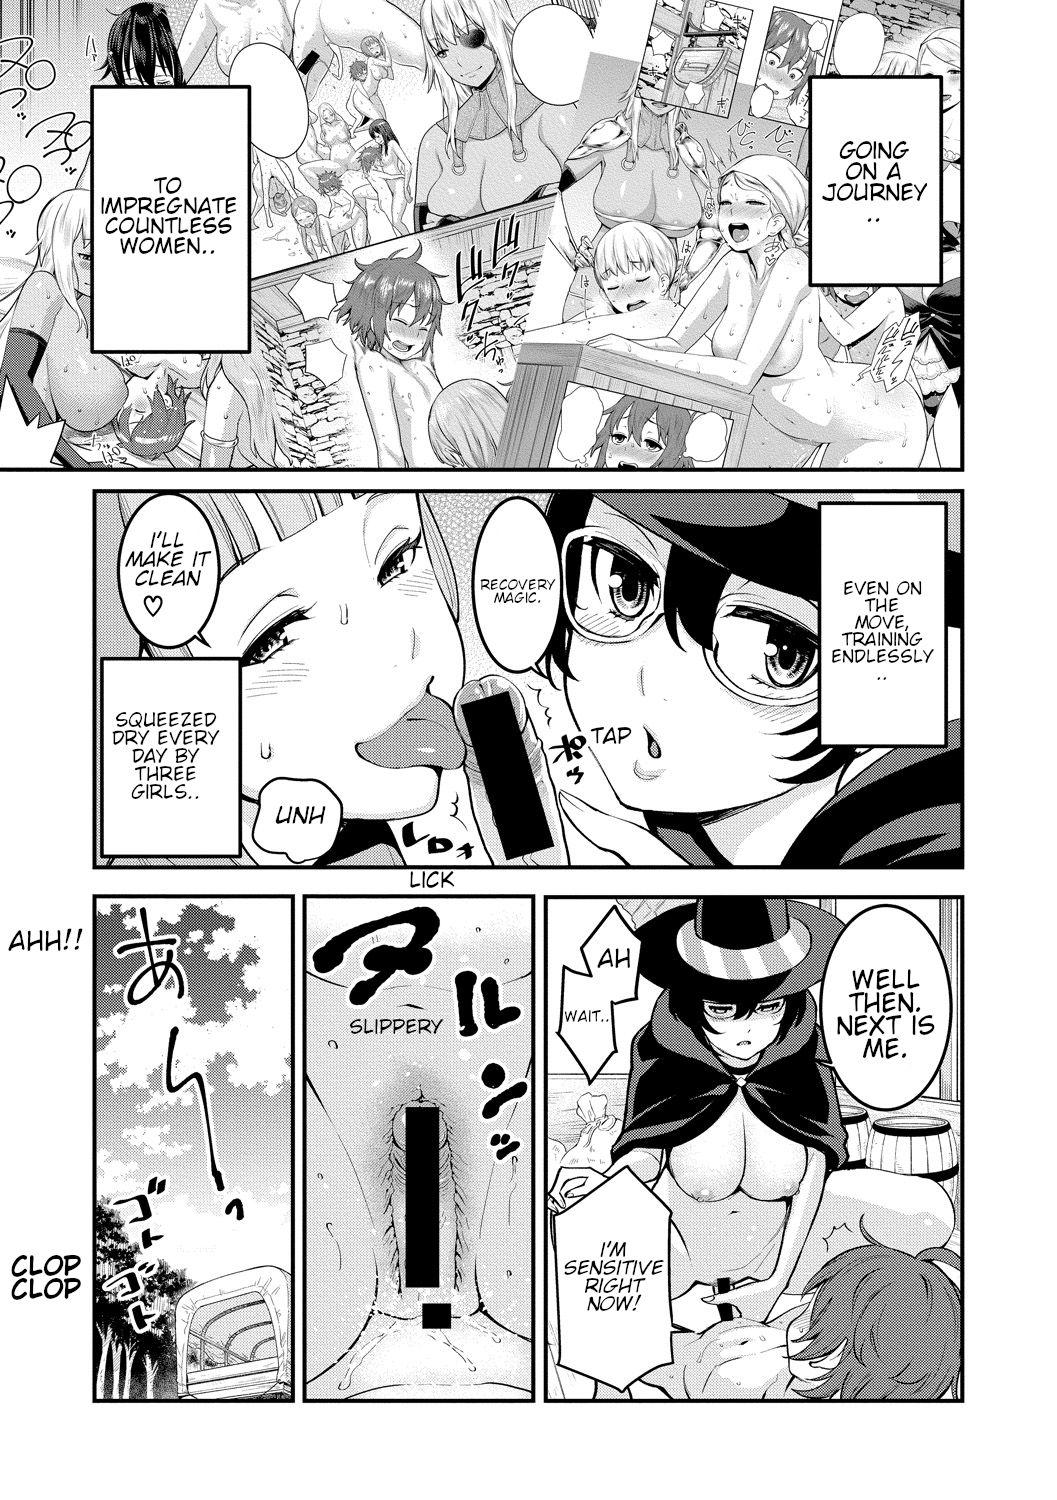 Suck Cock Chintore Quest II: Shota Yuusha Elf no Sato de Dai Rankou | Chintore Quest II: Shota Hero and the Great Elf Village Orgy Girlfriend - Page 3